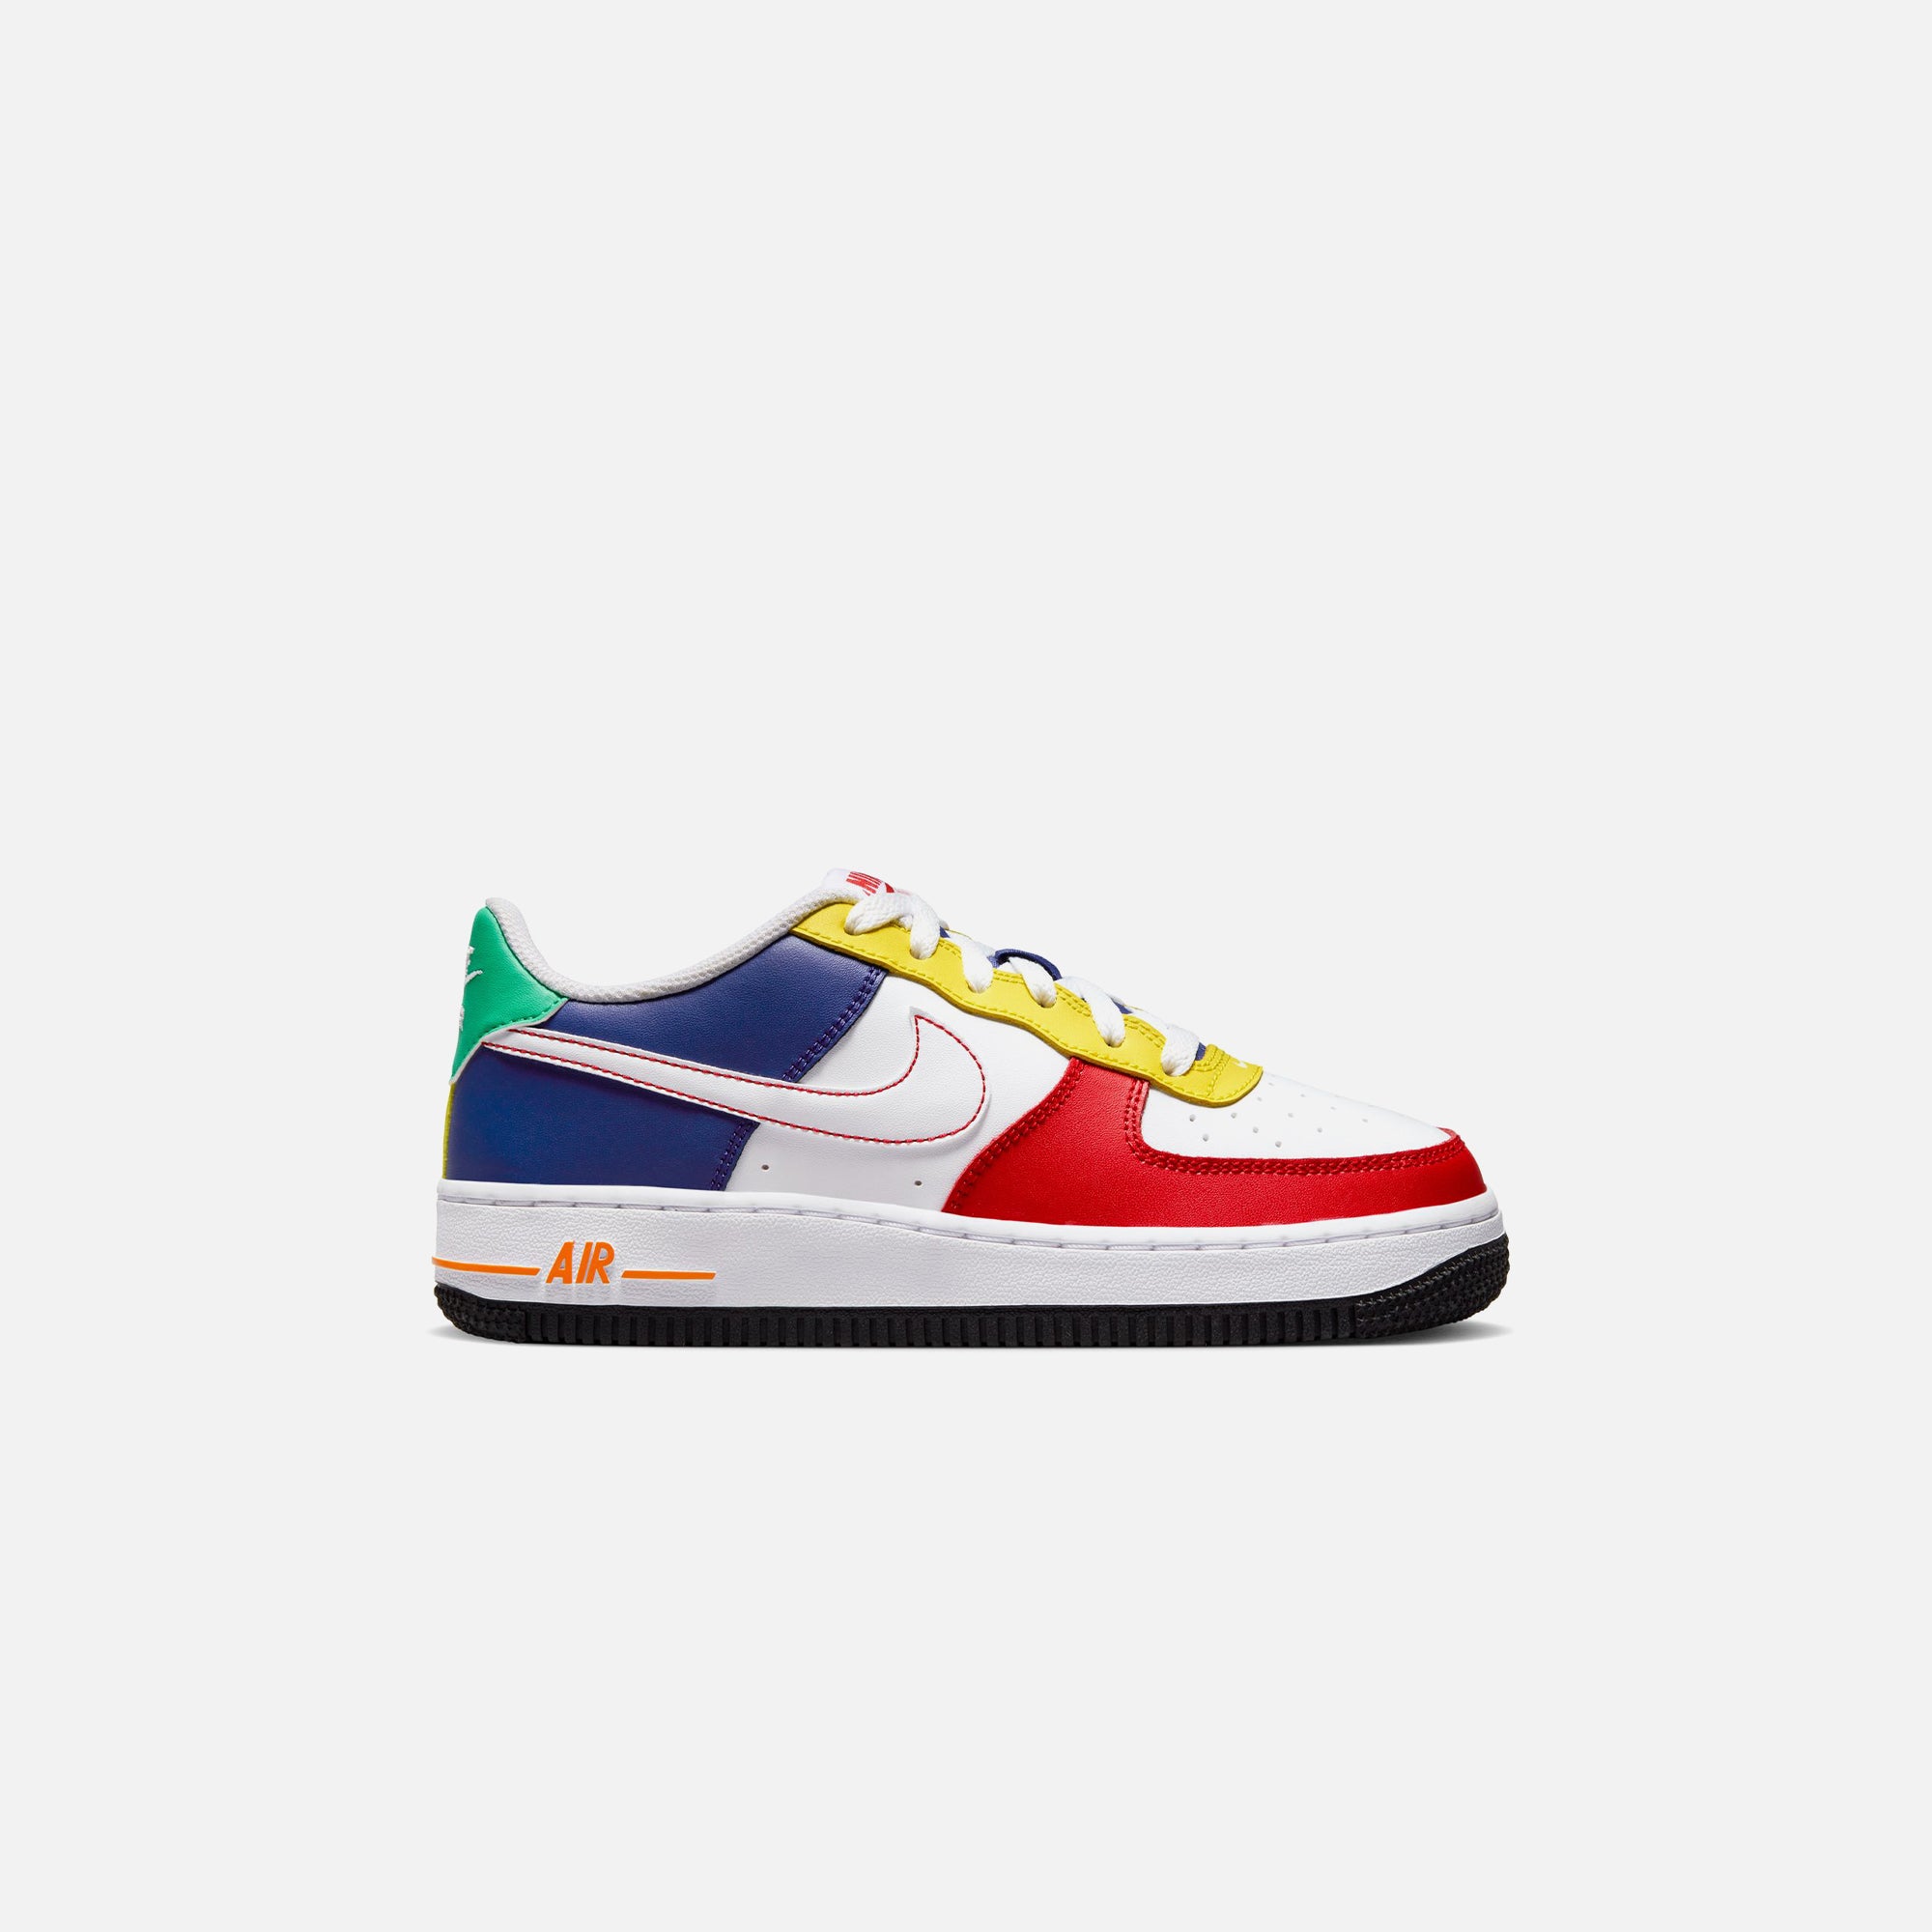 Nike GS Air Force 1 Low LV8 - University Red / White / Deep Royal ...